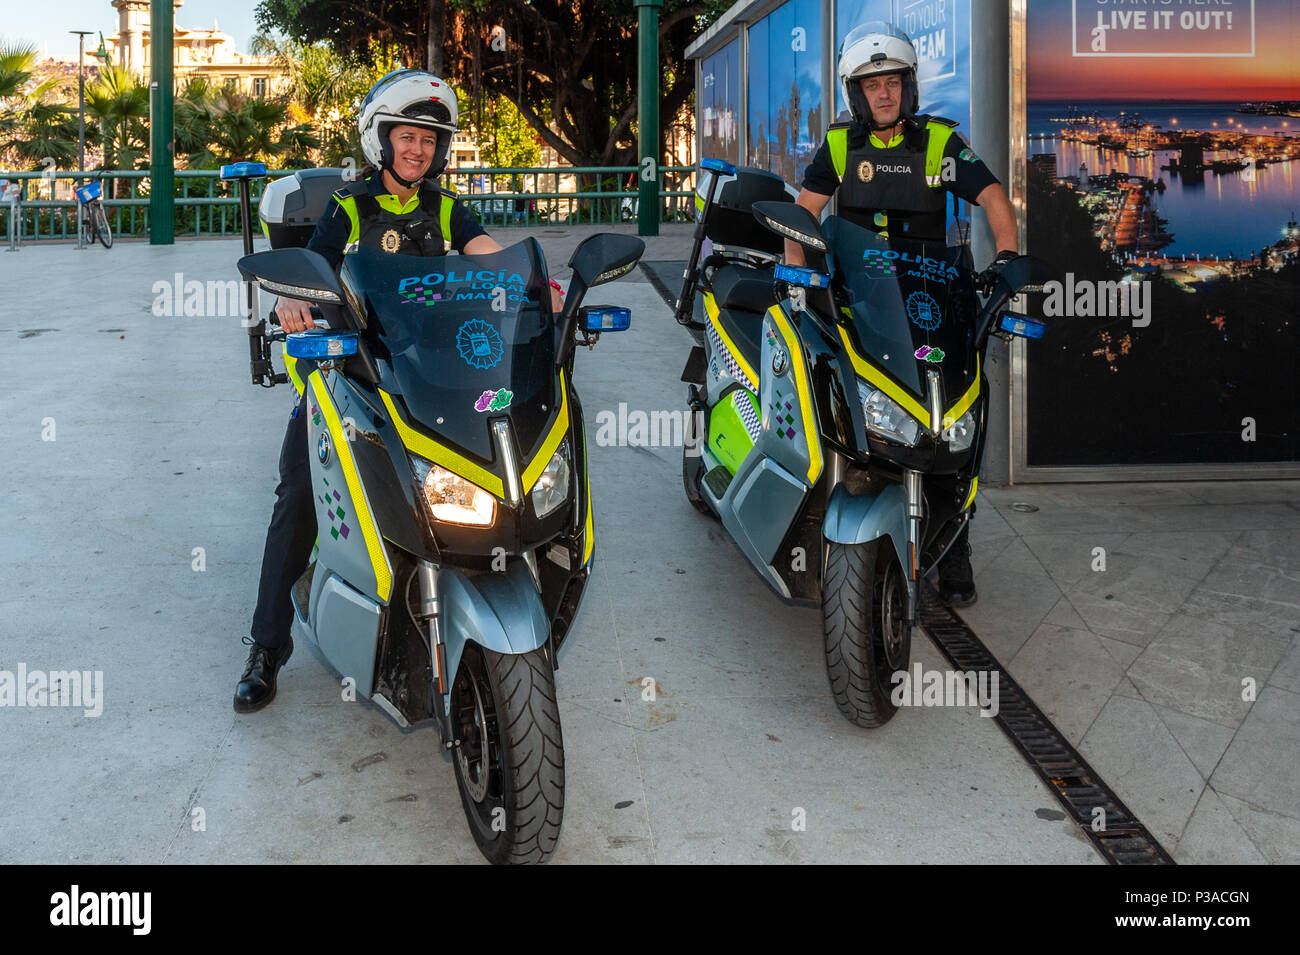 Two Spanish local police officers on patrol on new scooters in Malaga, Spain. Stock Photo